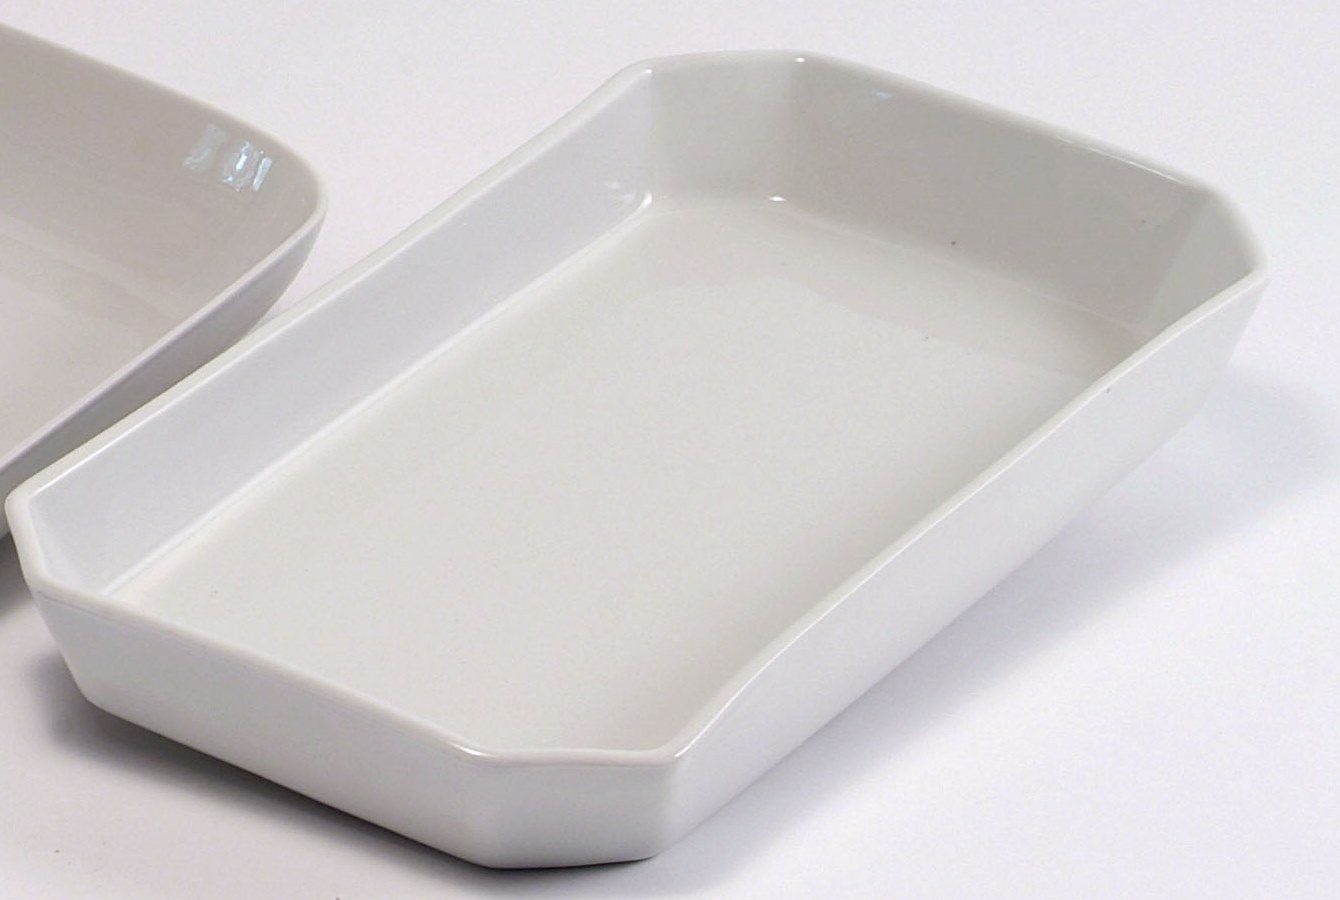 Oblong Dish Hire Return Clean or Dirty Option Available